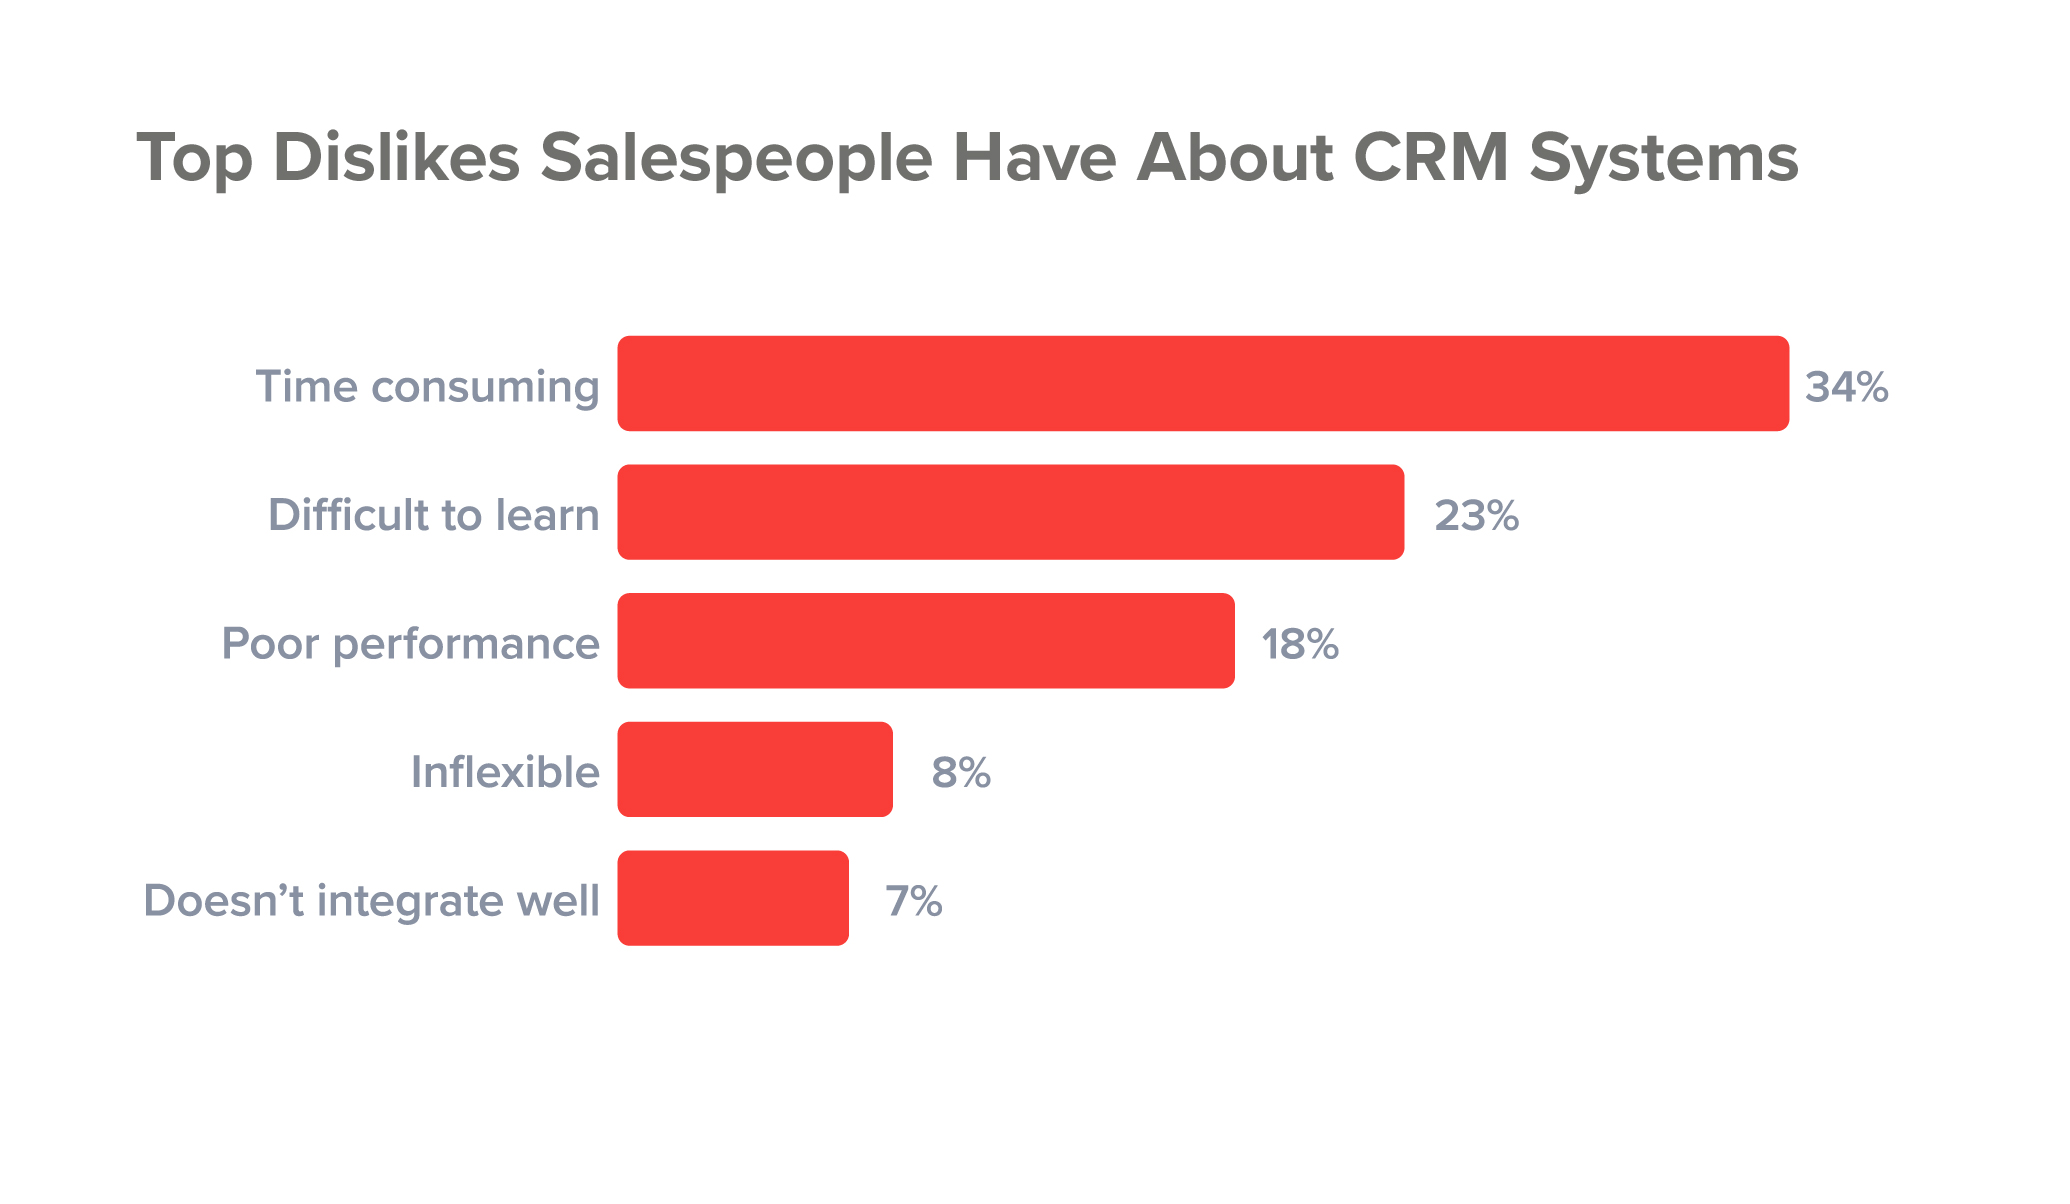 Top dislikes salespeople have about CRM systems